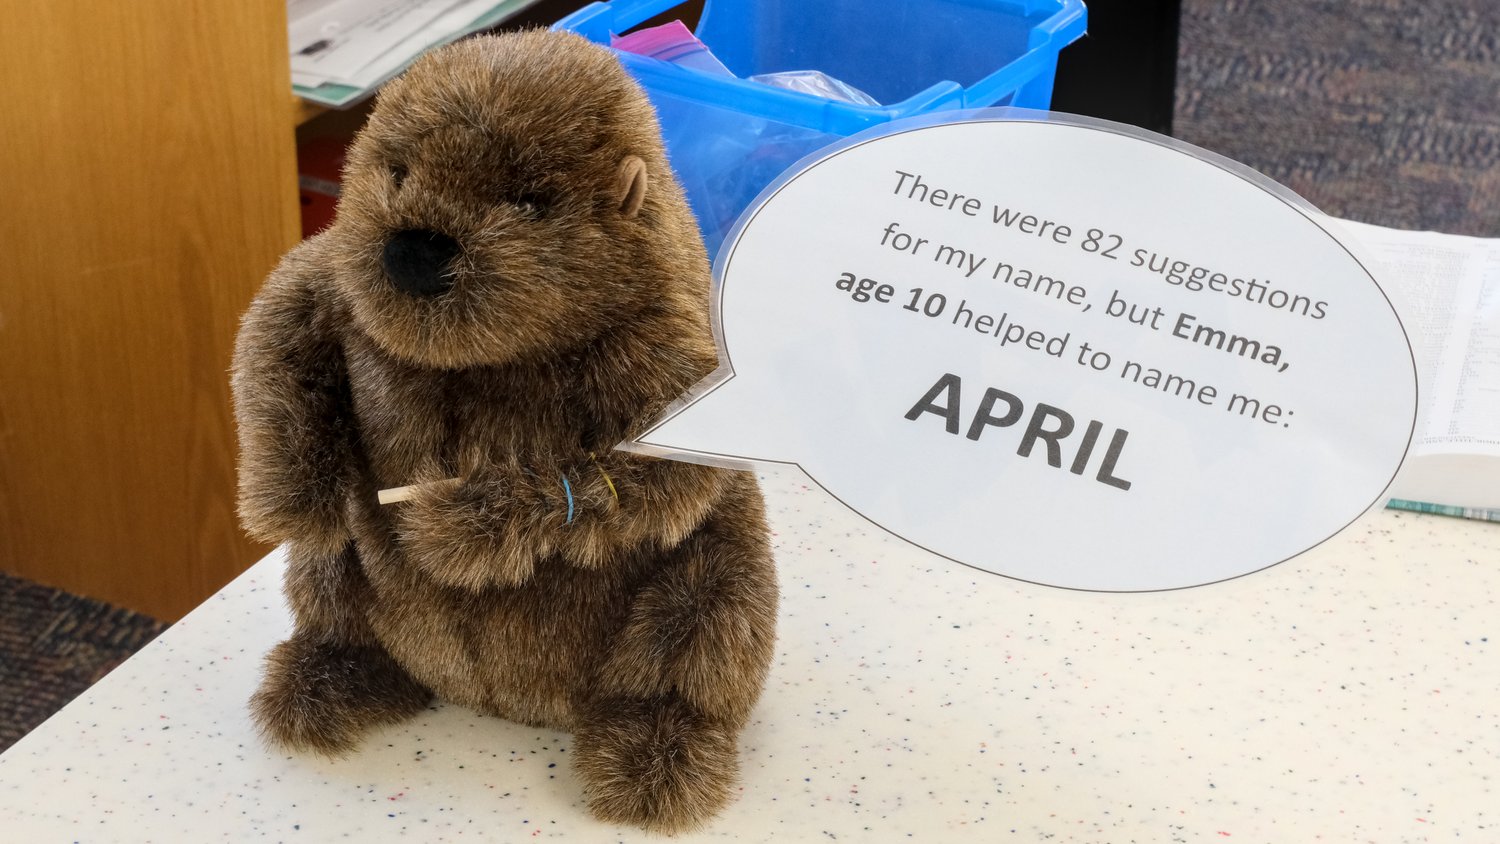 Woodstock Public Library's new mascot, April, the groundhog.